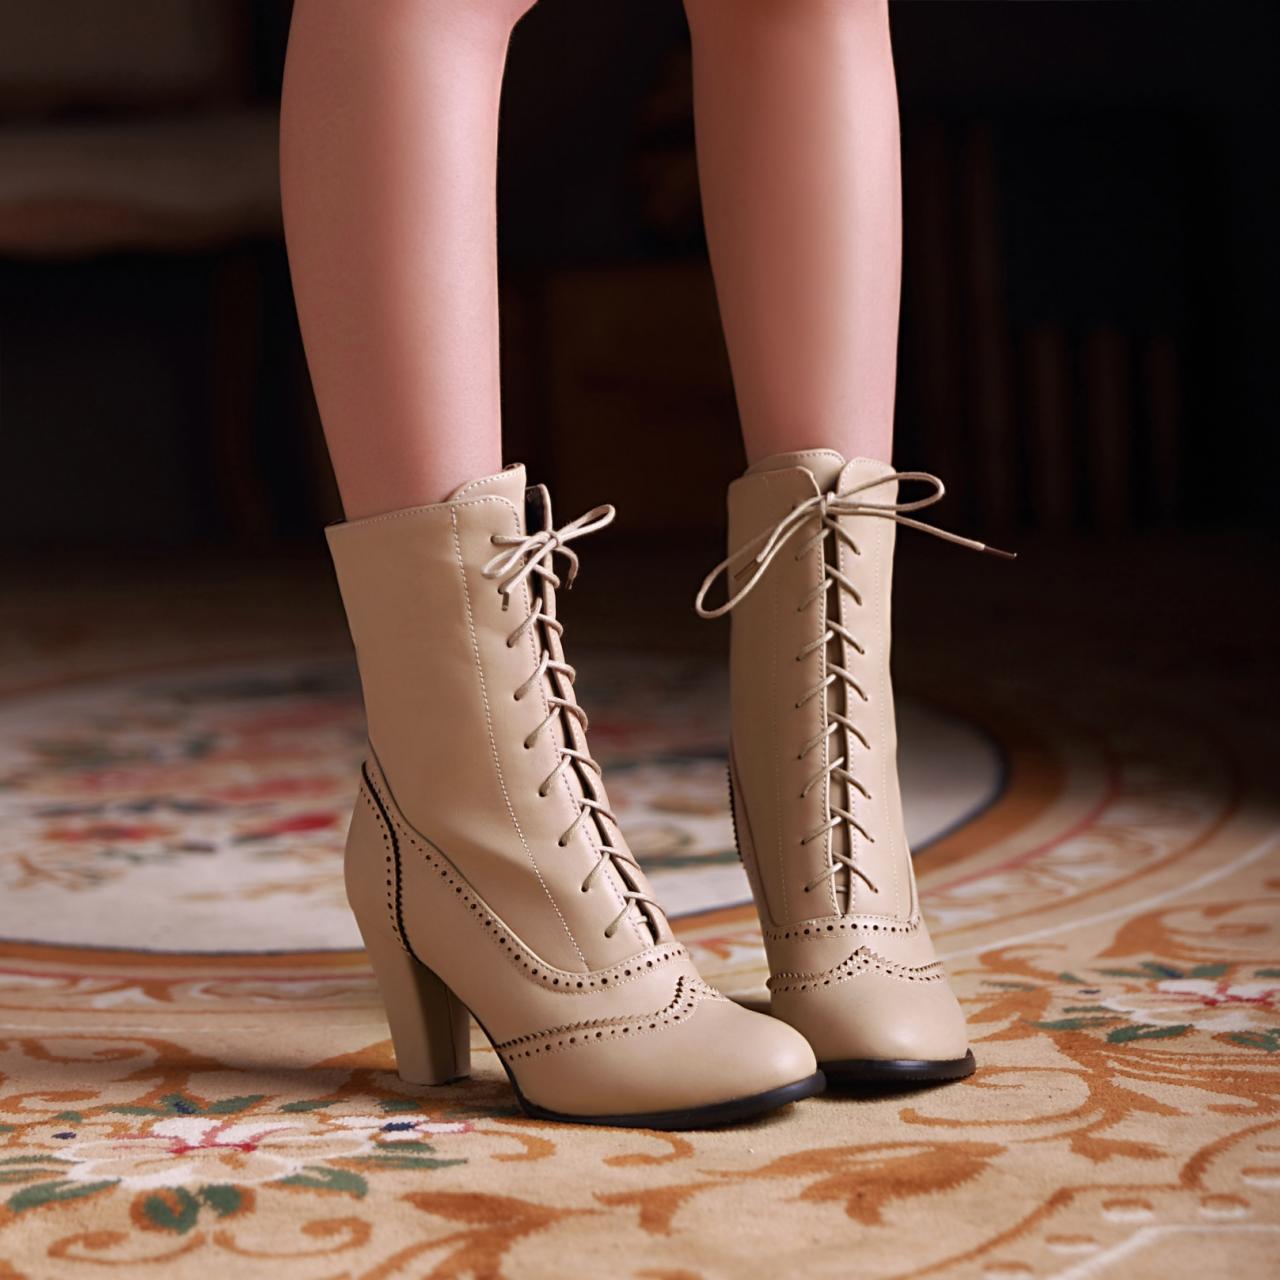 Platform Thick With Low Heel Round Toe Lace Up Mid Calf Pu Leather Retro Women Boots